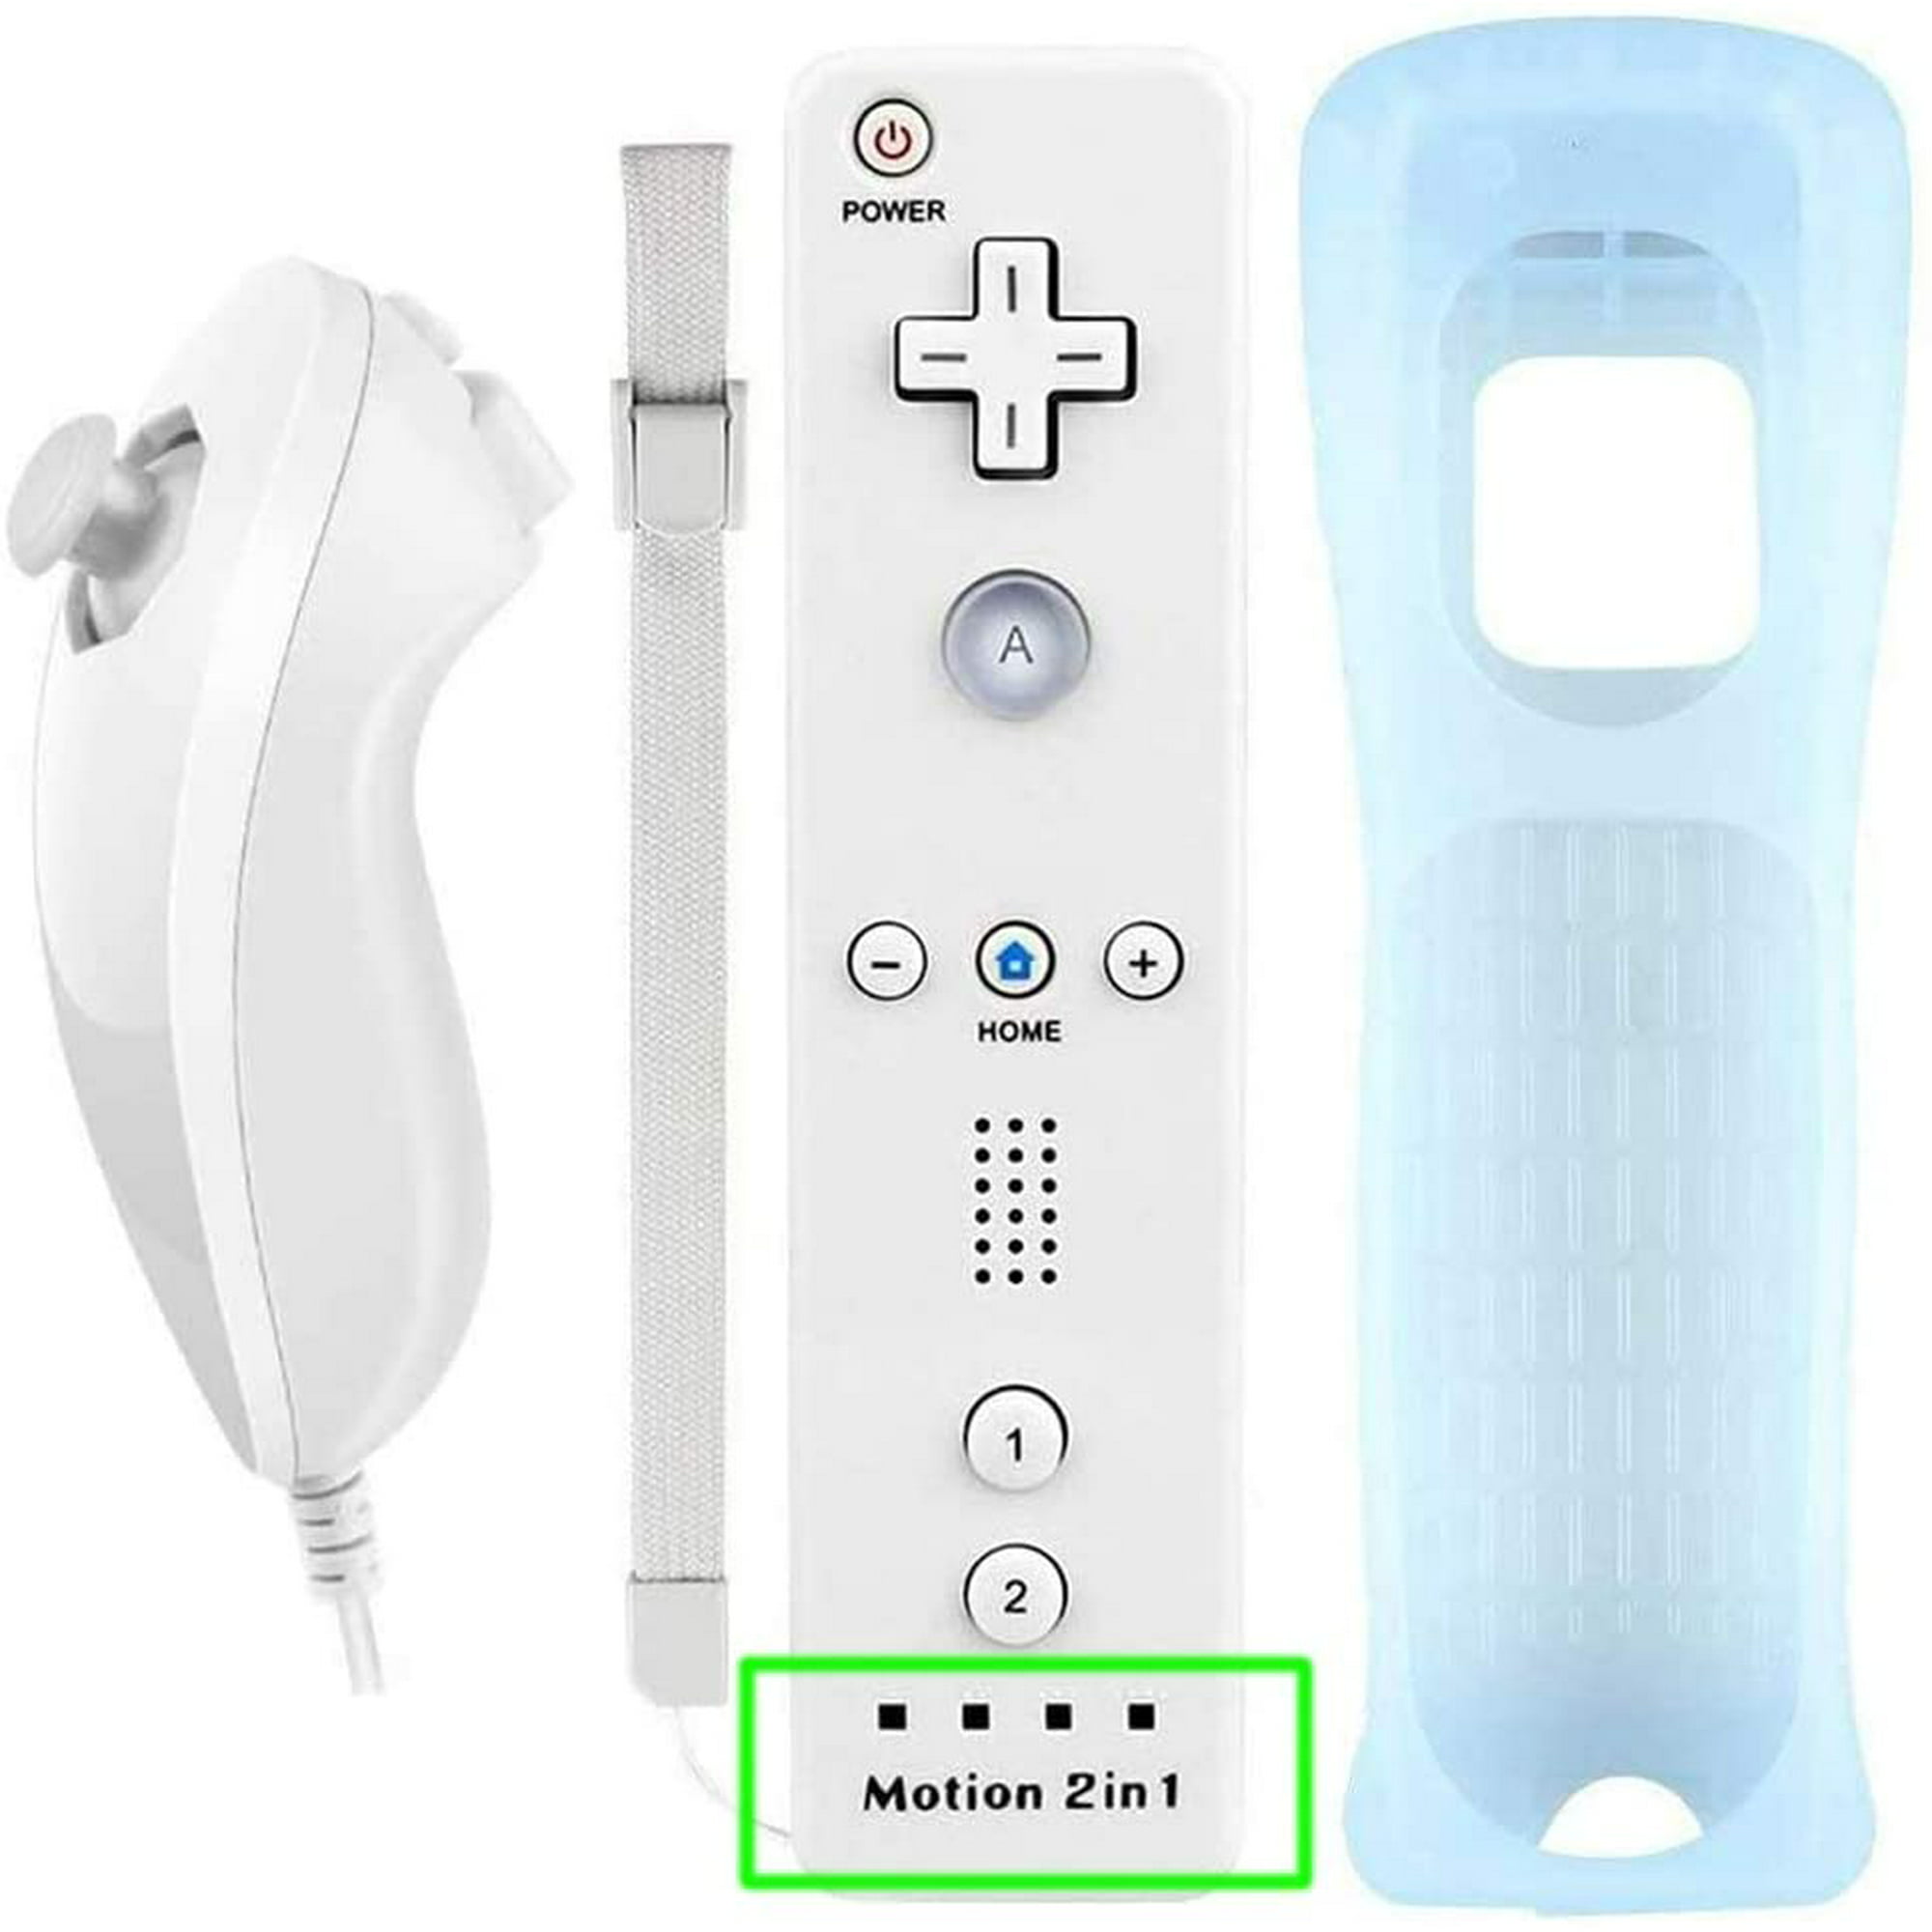 Wii Motion Plus. Wii Motion Plus inside. Remote Nunchuk Wii Block. Remote Nunchuk Wii Blфck. Моушен плюс